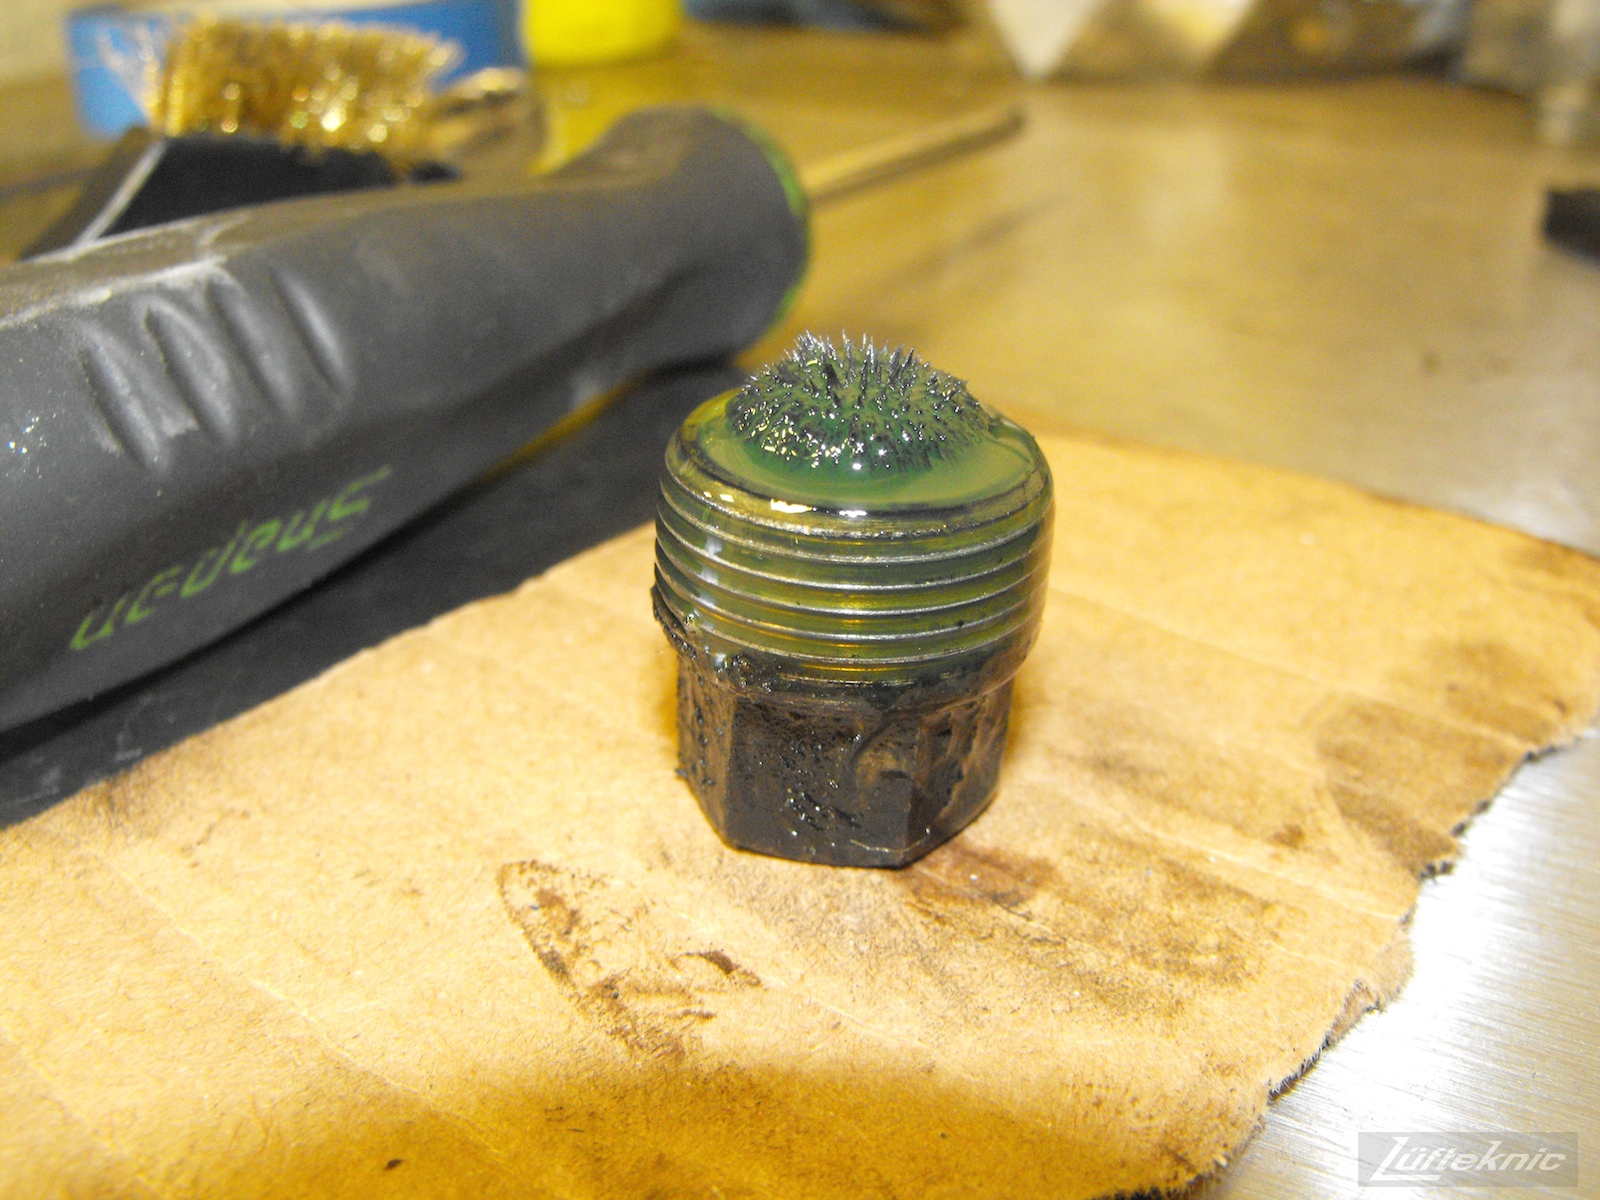 A magnetic oil drain plug showing significant metal shavings from an Irish Green Porsche 912 undergoing restoration at Lufteknic.